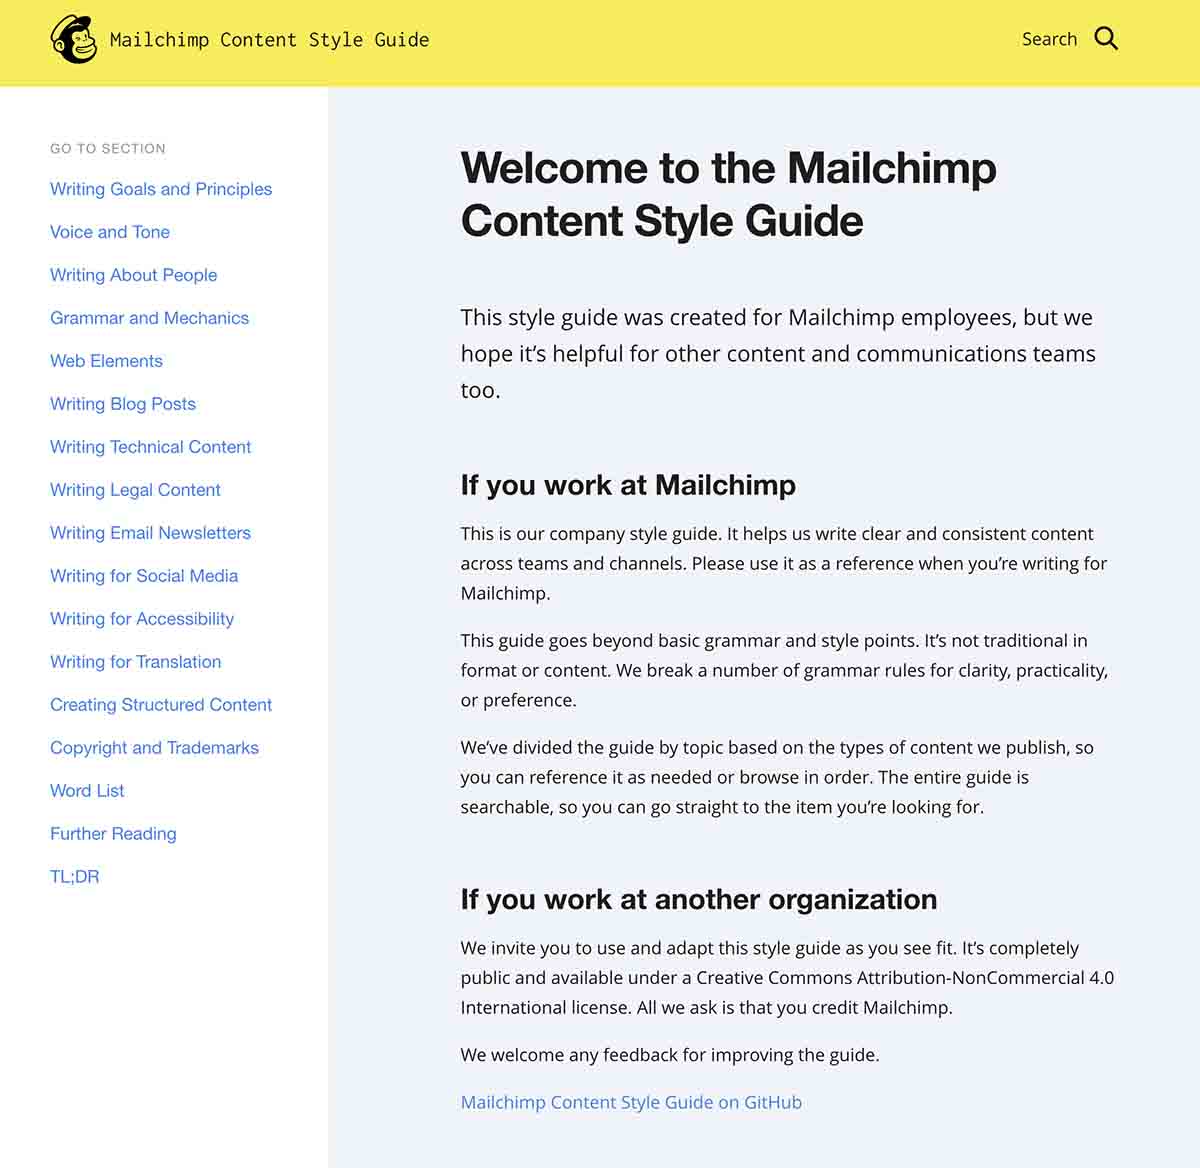 Screenshot of Mailchimp's style guide